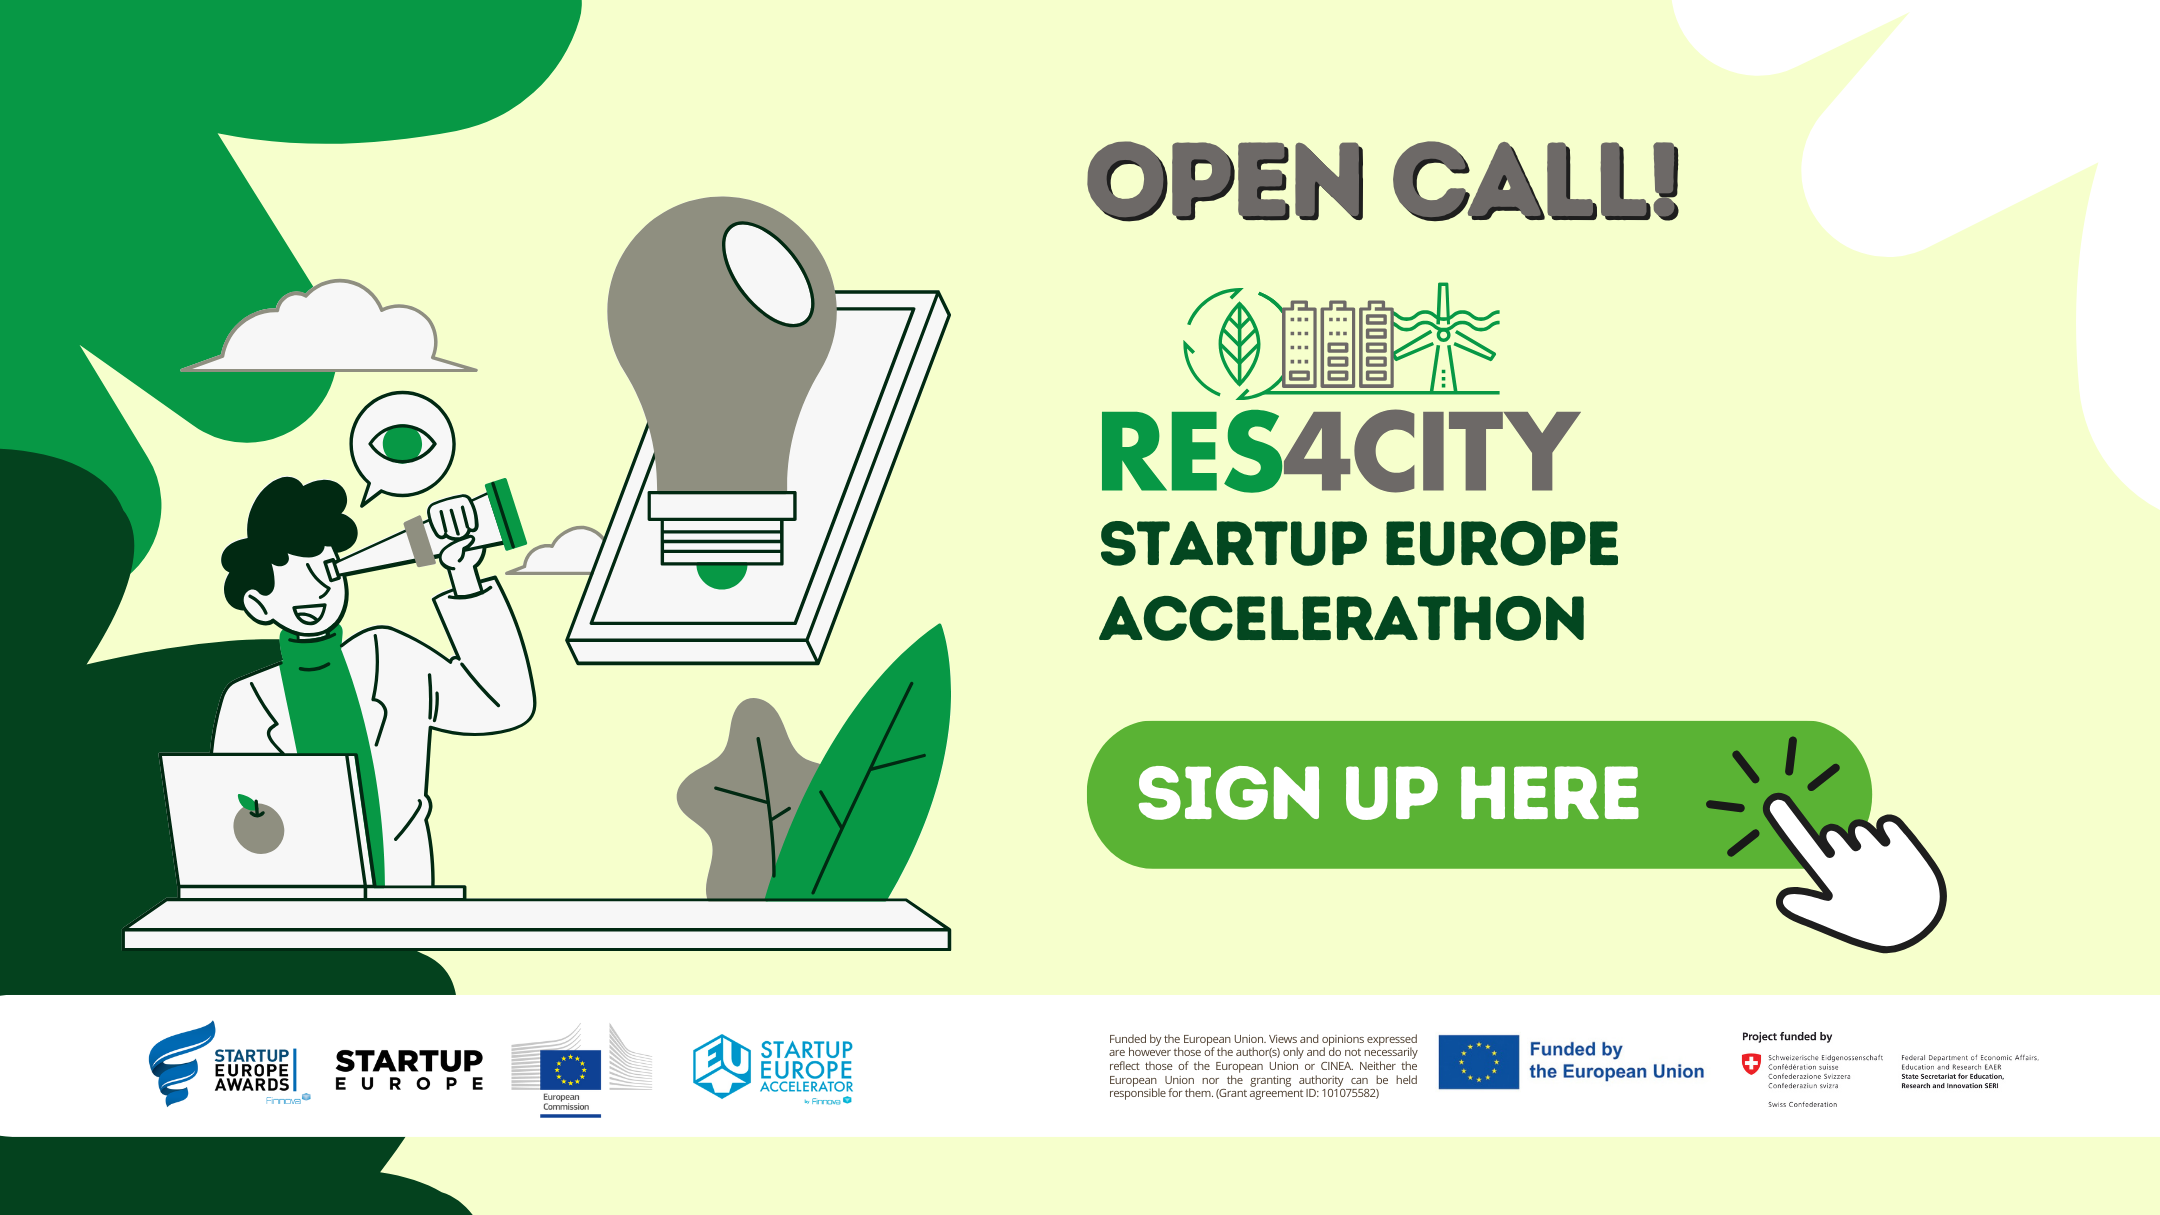 Open call for Res4CITY Startup Europe Accelerathon to seek green solutions for smart cities